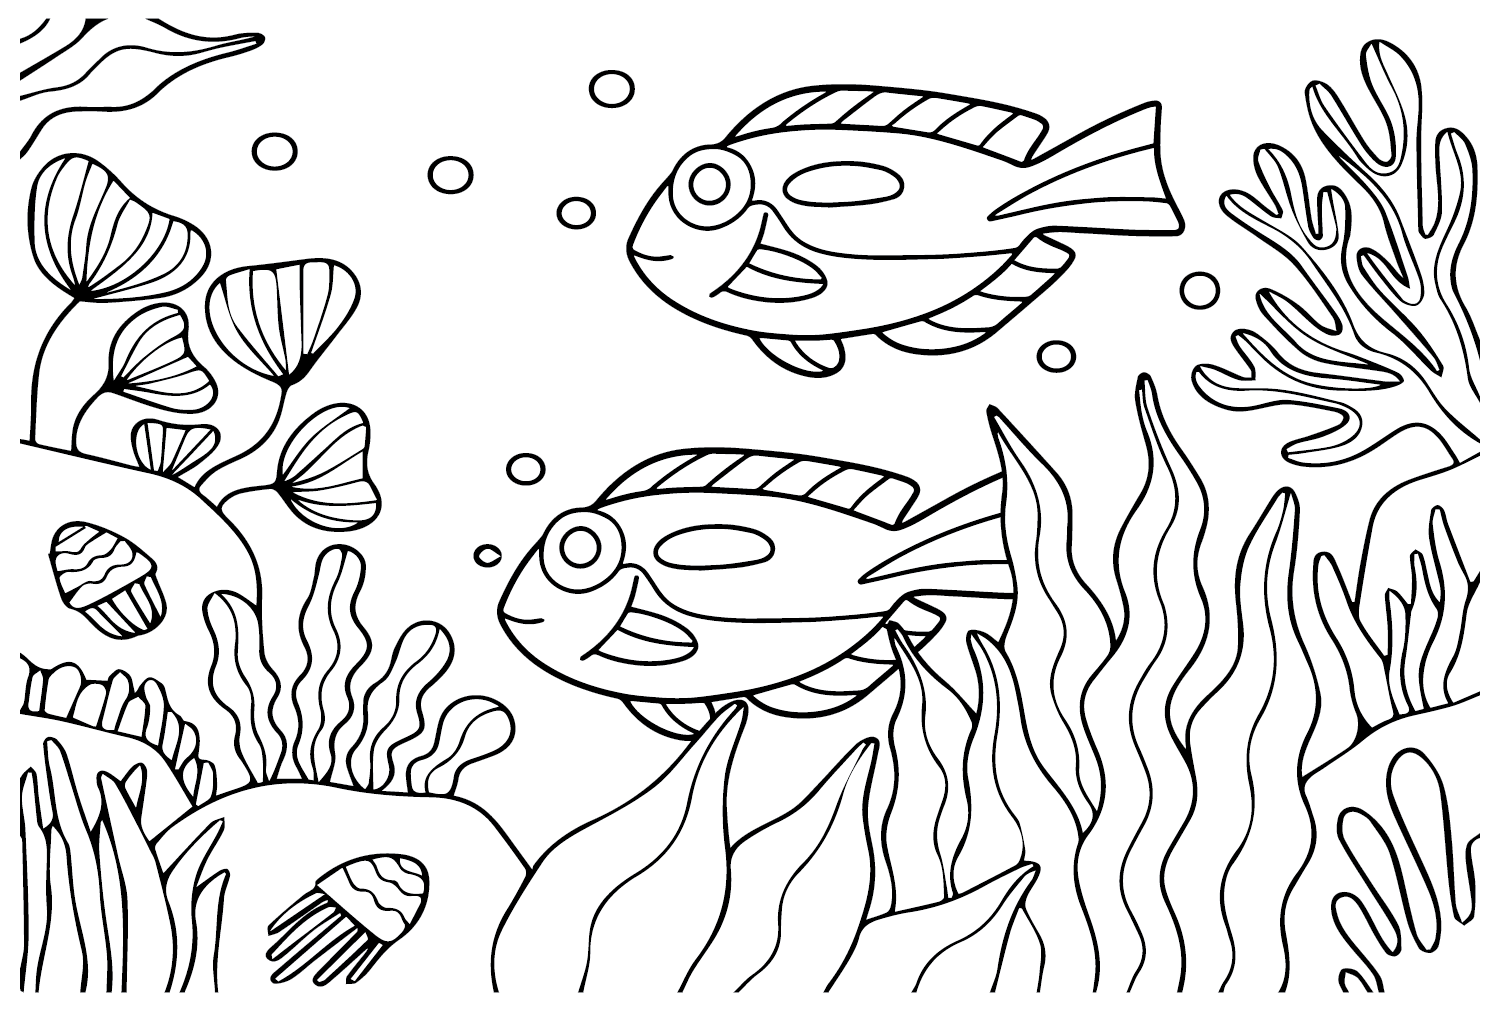 Pictures Tang Fish Coloring Page - Free Printable Coloring Pages